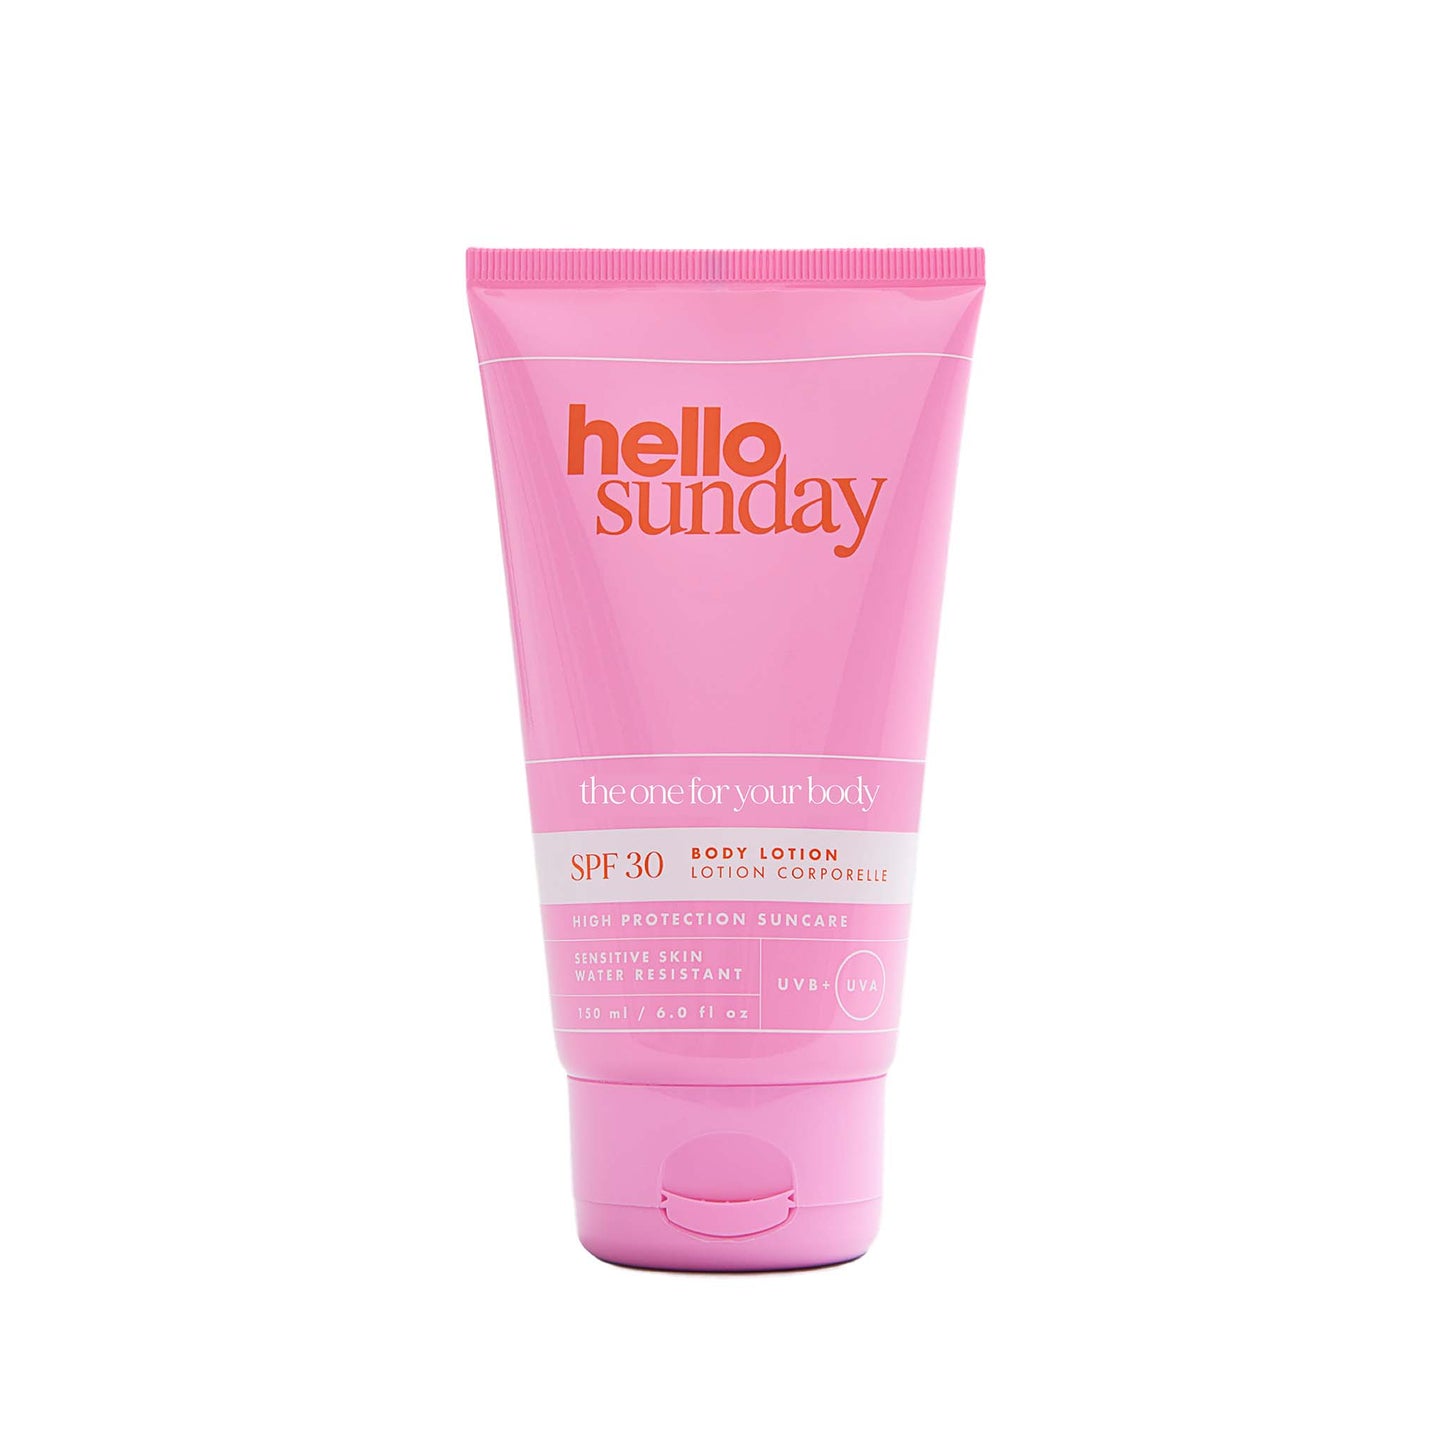 the one for your body : body lotion SPF30